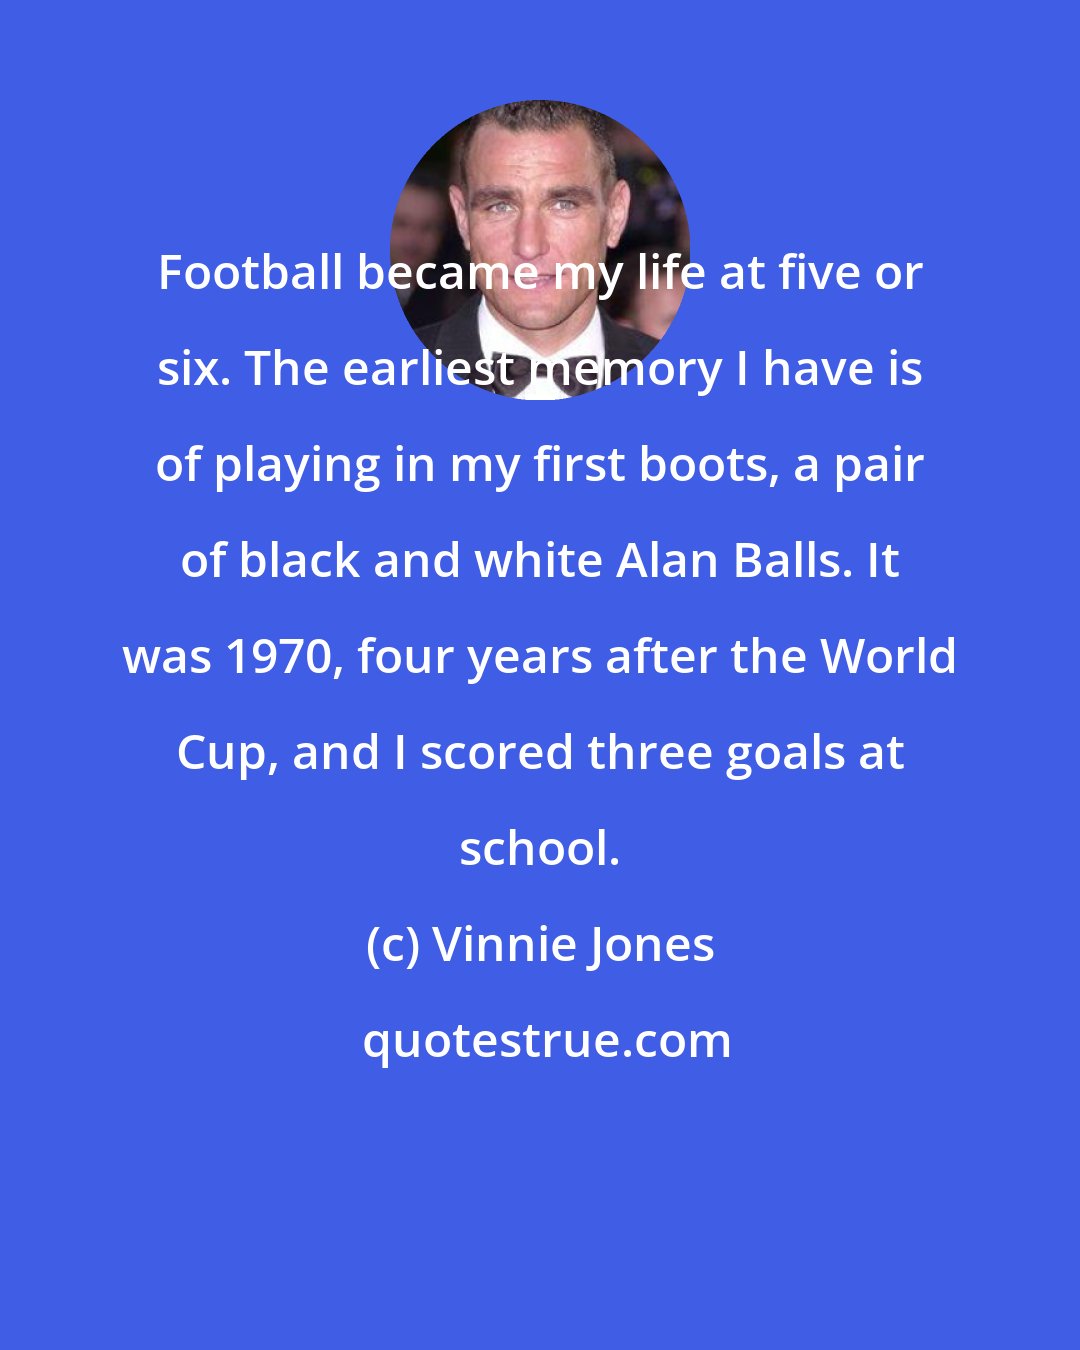 Vinnie Jones: Football became my life at five or six. The earliest memory I have is of playing in my first boots, a pair of black and white Alan Balls. It was 1970, four years after the World Cup, and I scored three goals at school.